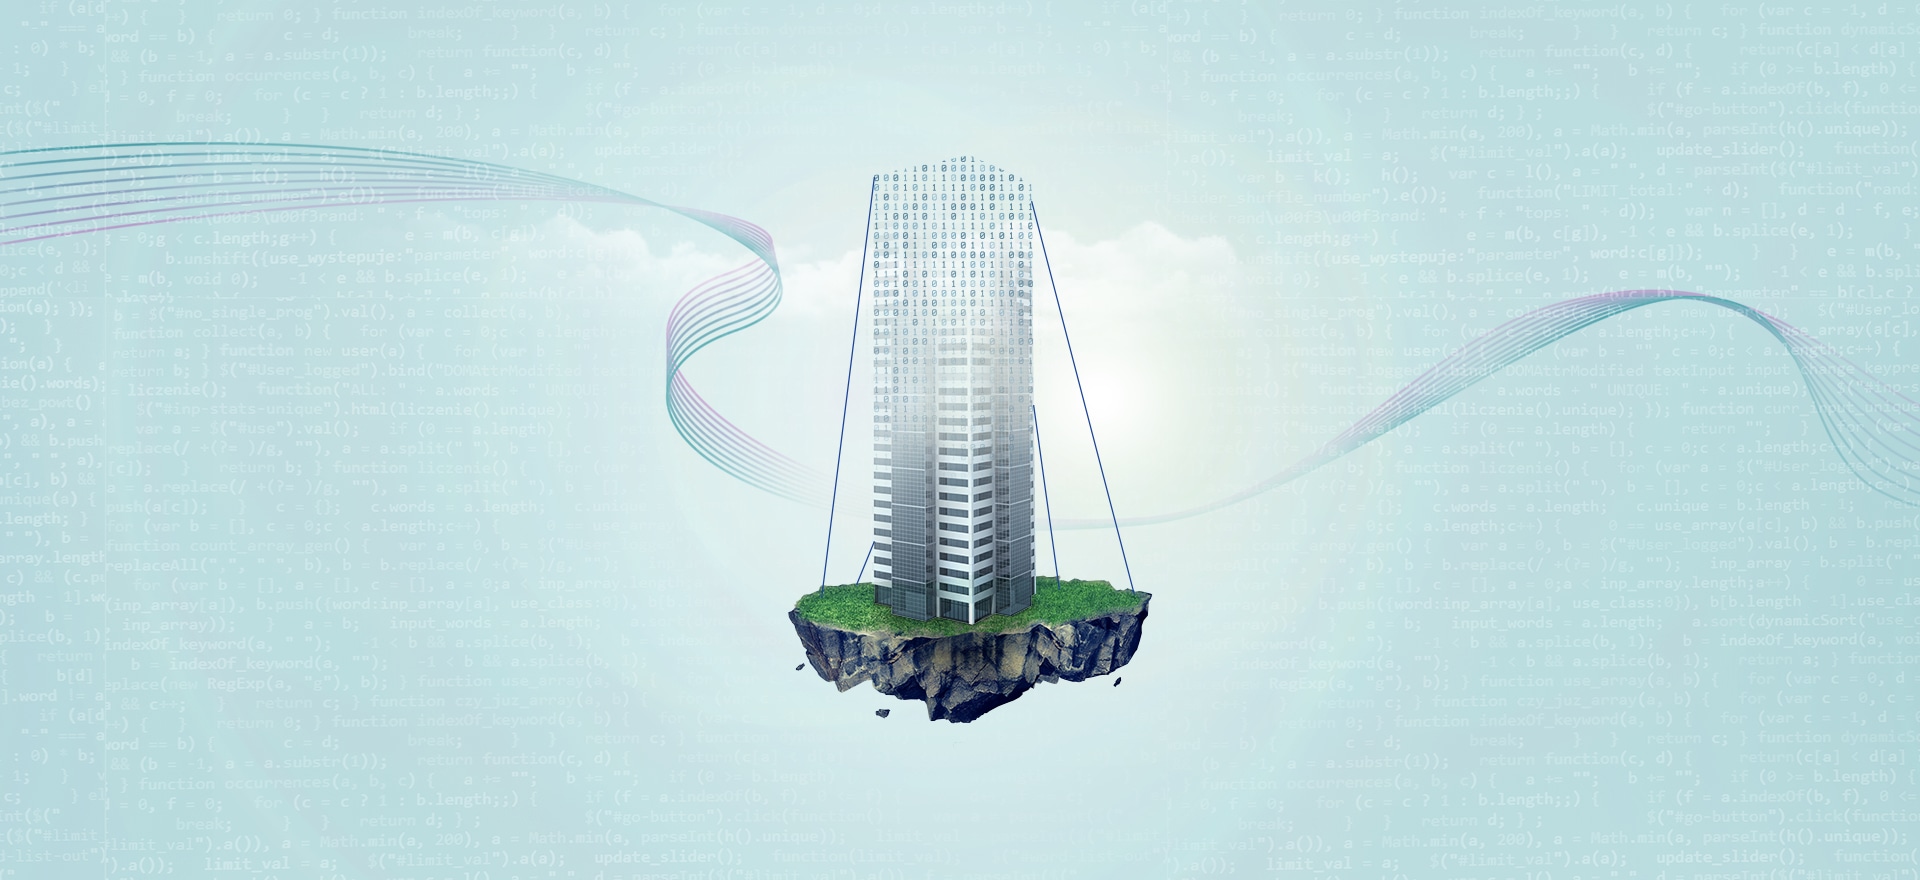 https://www2.deloitte.com/content/dam/insights/primary/full-bleed/US176319_FSI_Outlook-Commercial-real-estate_Banner-1920x880.png